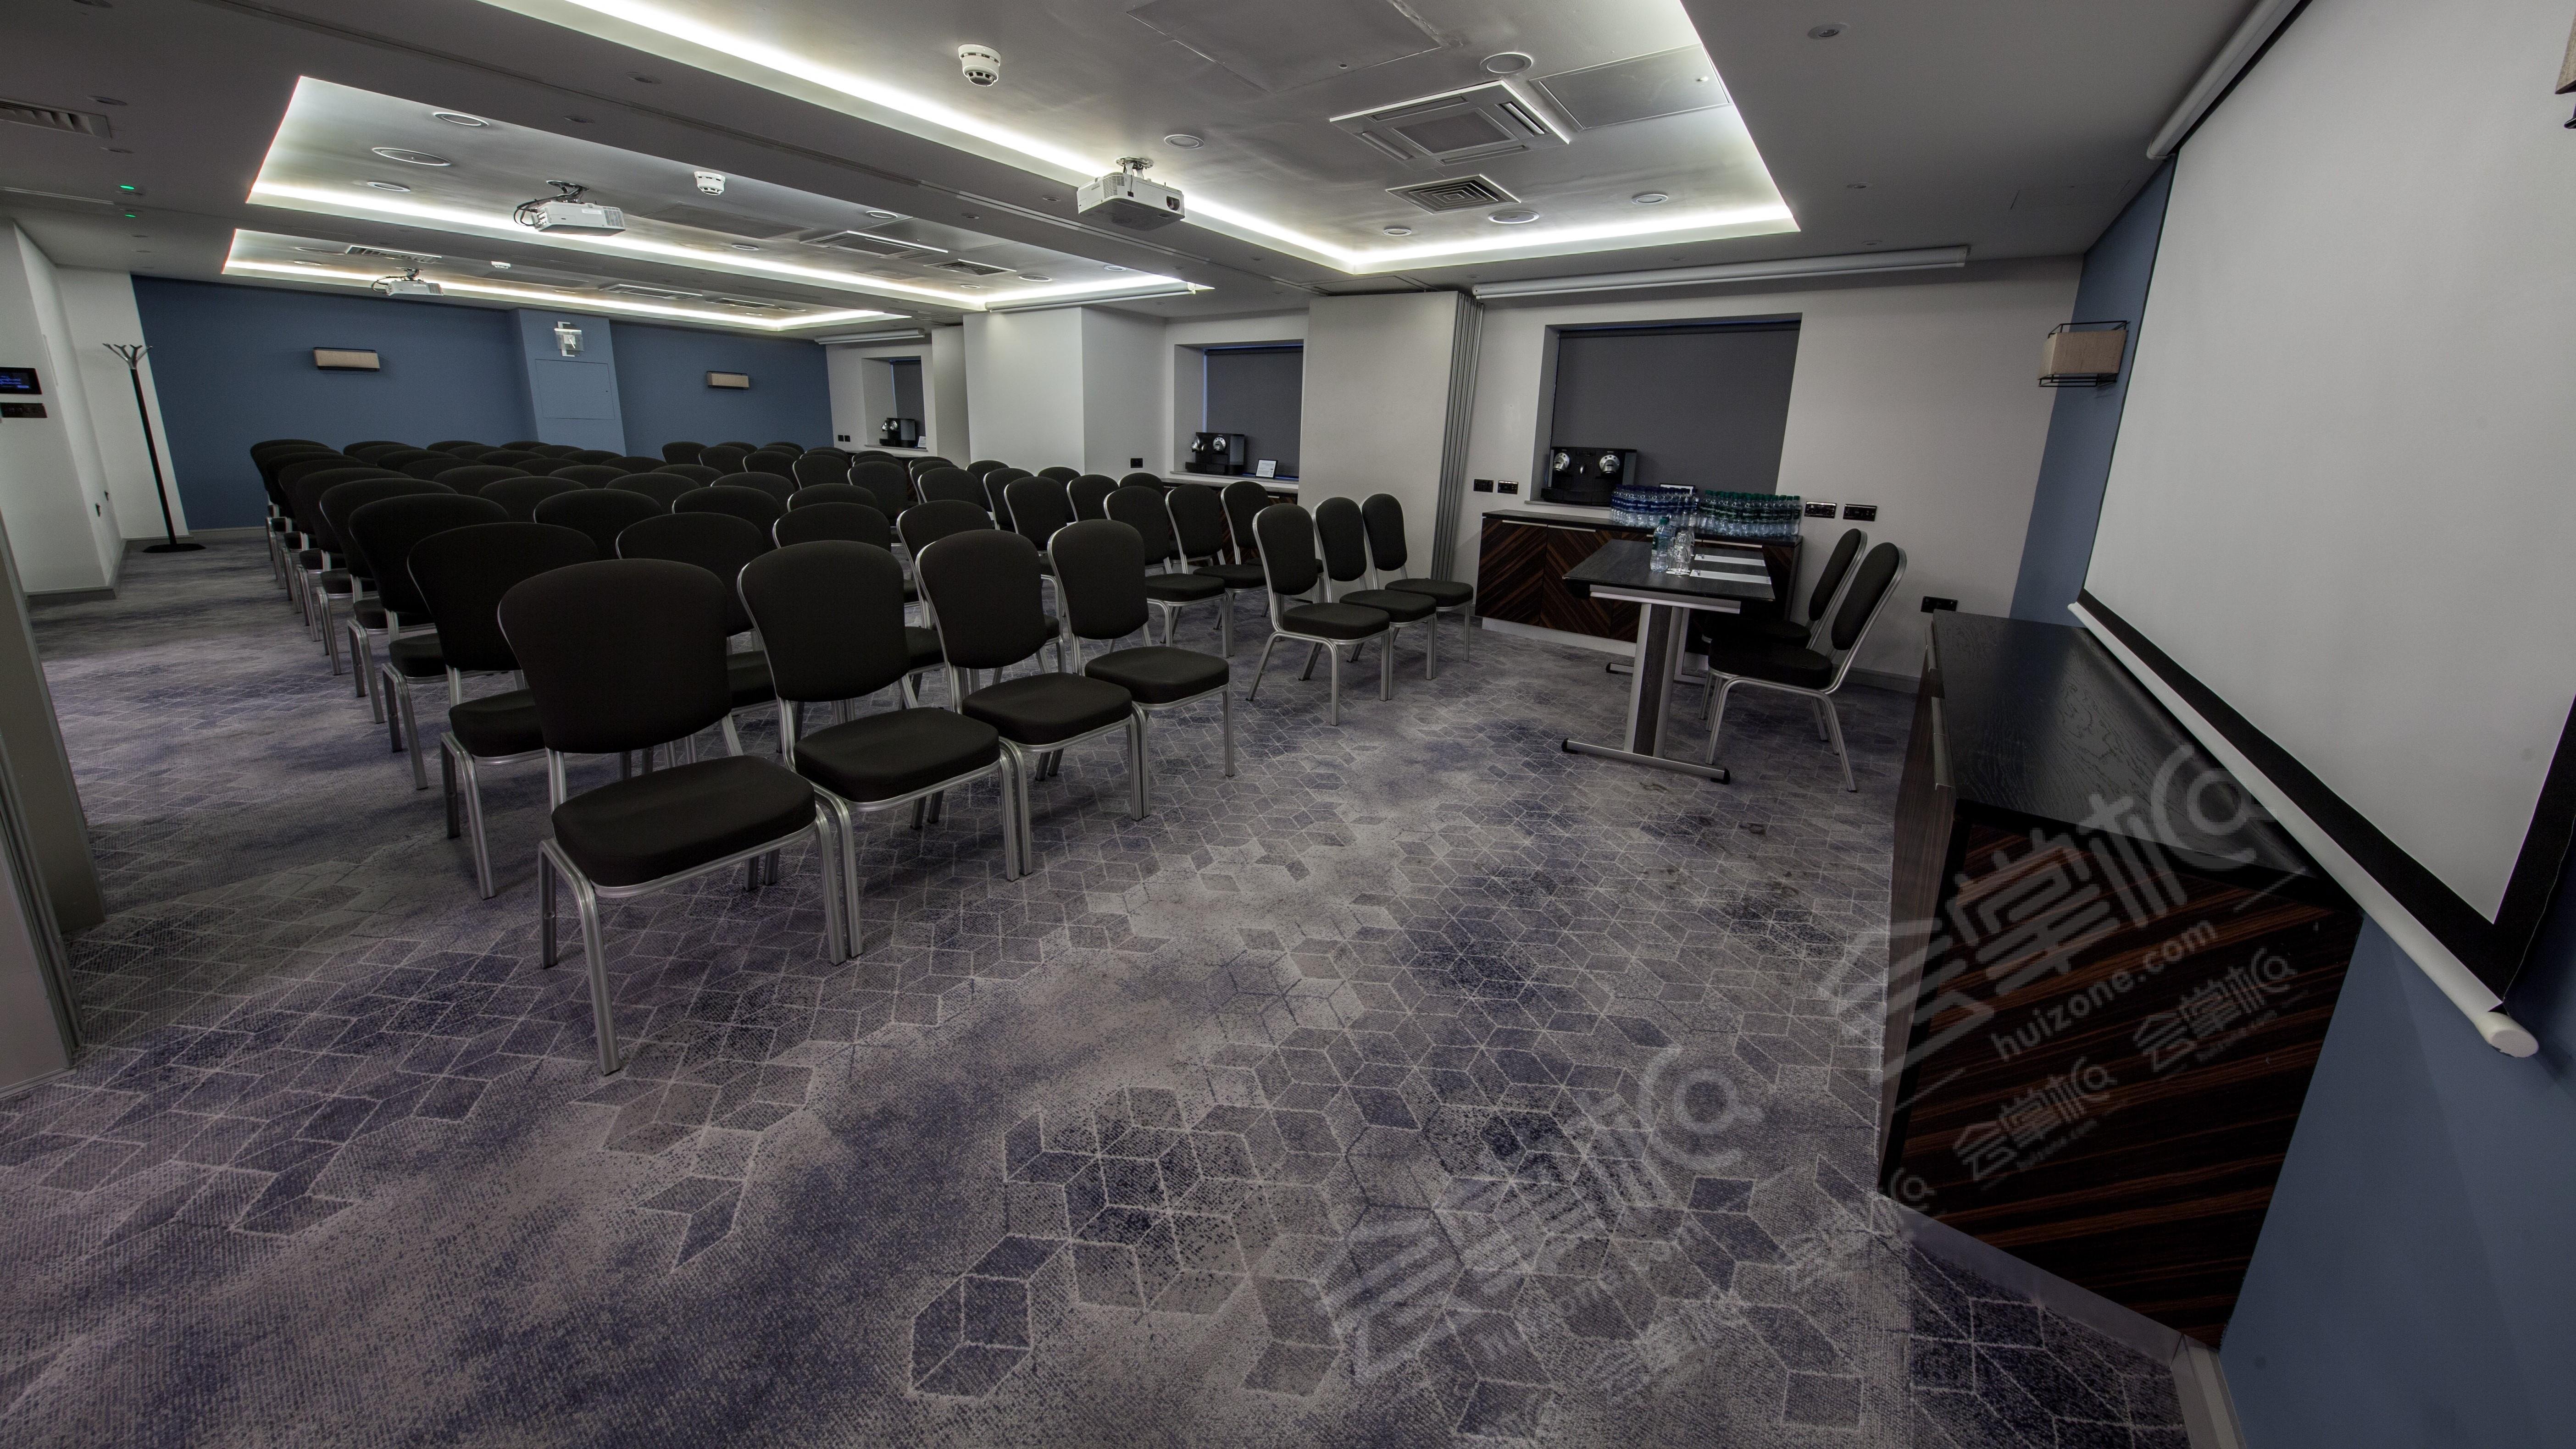 The Birmingham Conference and Events Centre at the Holiday Inn Birmingham City Centre8